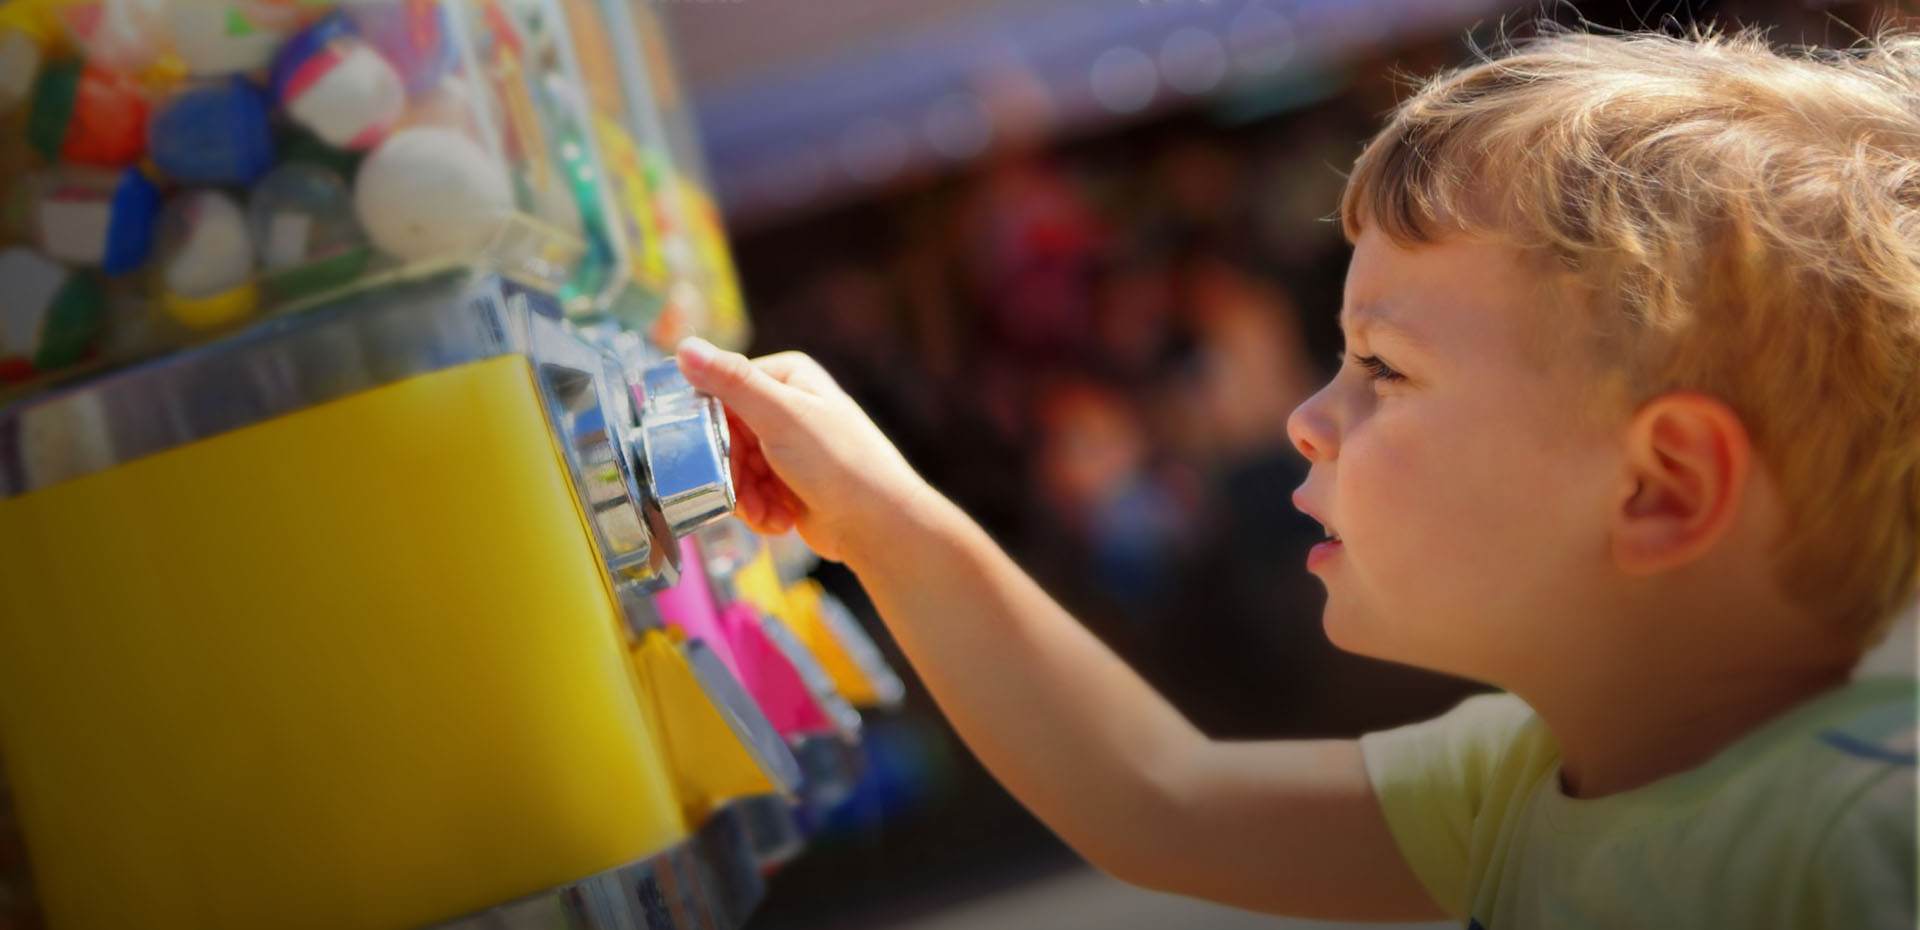 Installers Of Toys Vending Machines For Soft Play Businesses